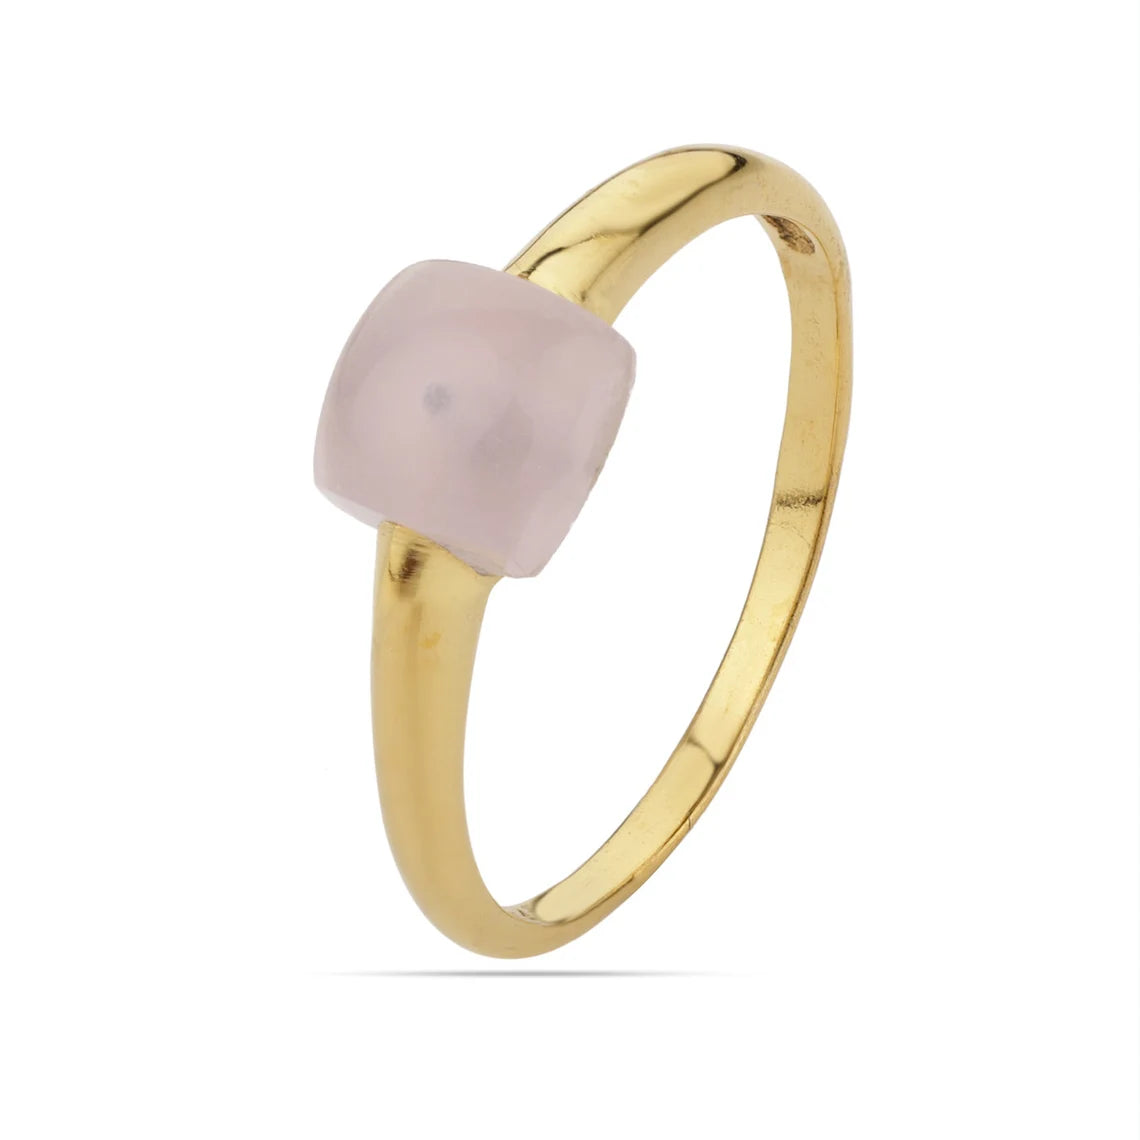 Rose Pink Chalcedony Ring, Stackable Ring, Bridesmaid ring, Stacker ring, Rose color ring, Cushion ring, Gold Gemstone Ring, Bridal ring